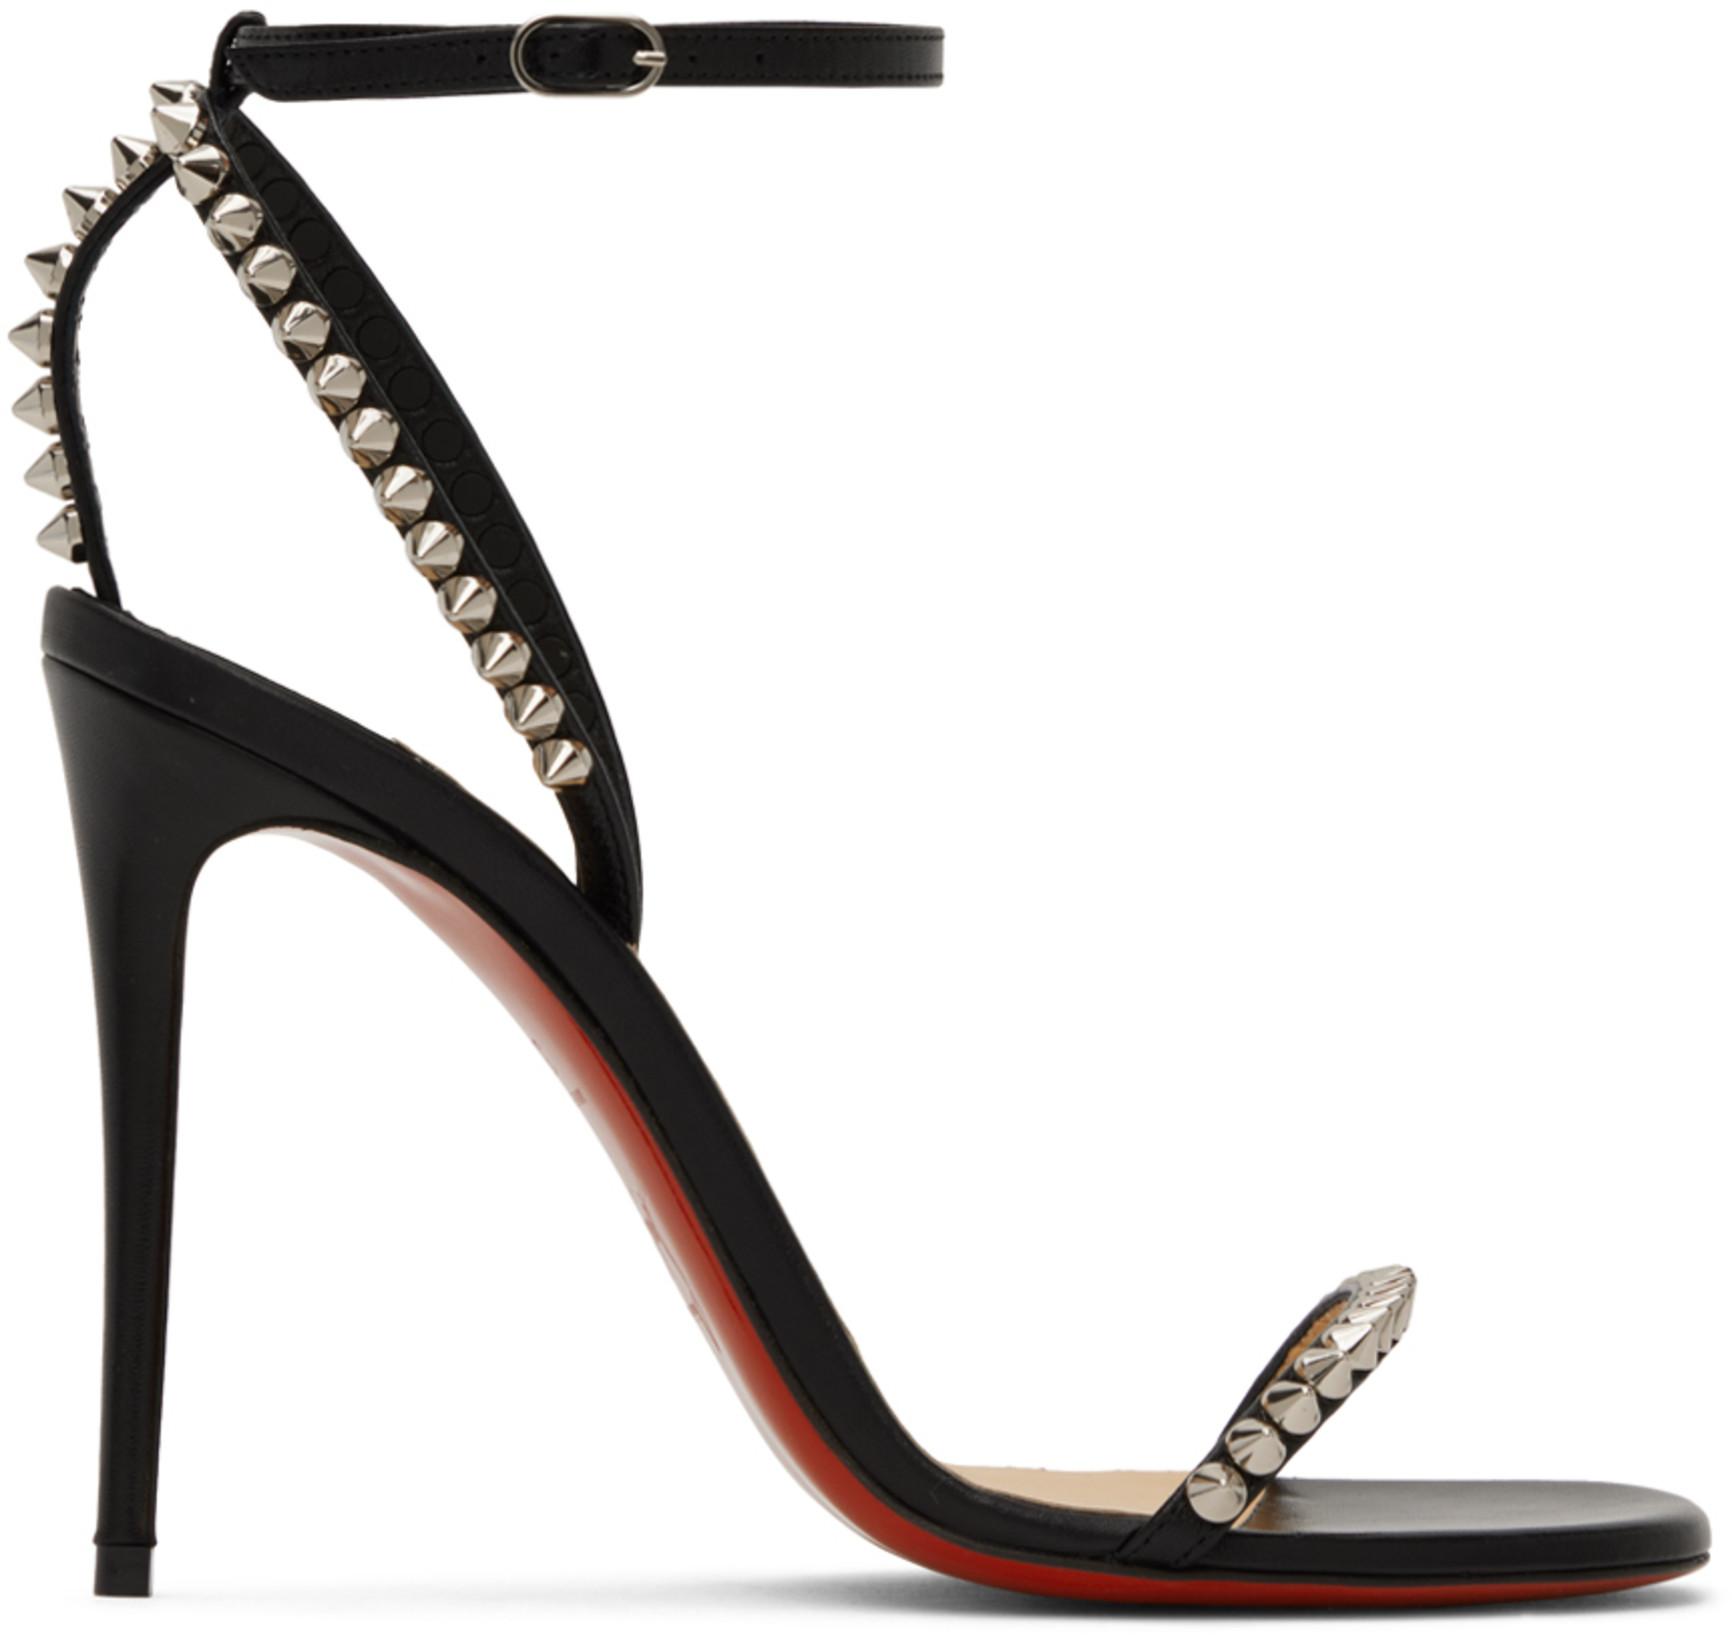 Black So Me 100 Heeled Sandals by CHRISTIAN LOUBOUTIN